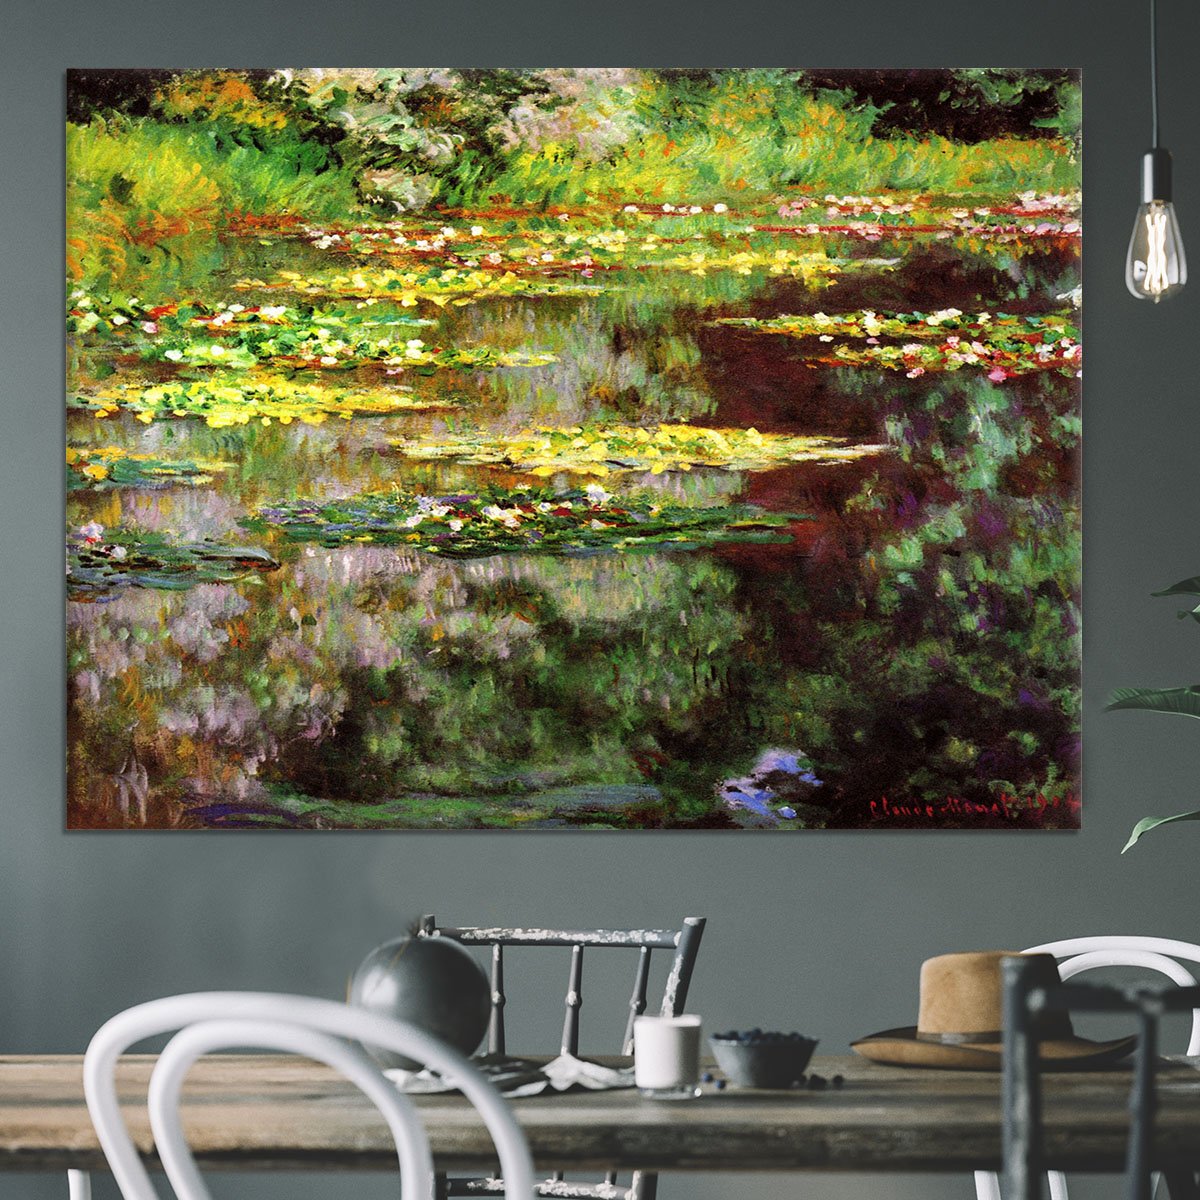 Sea rose pond by Monet Canvas Print or Poster